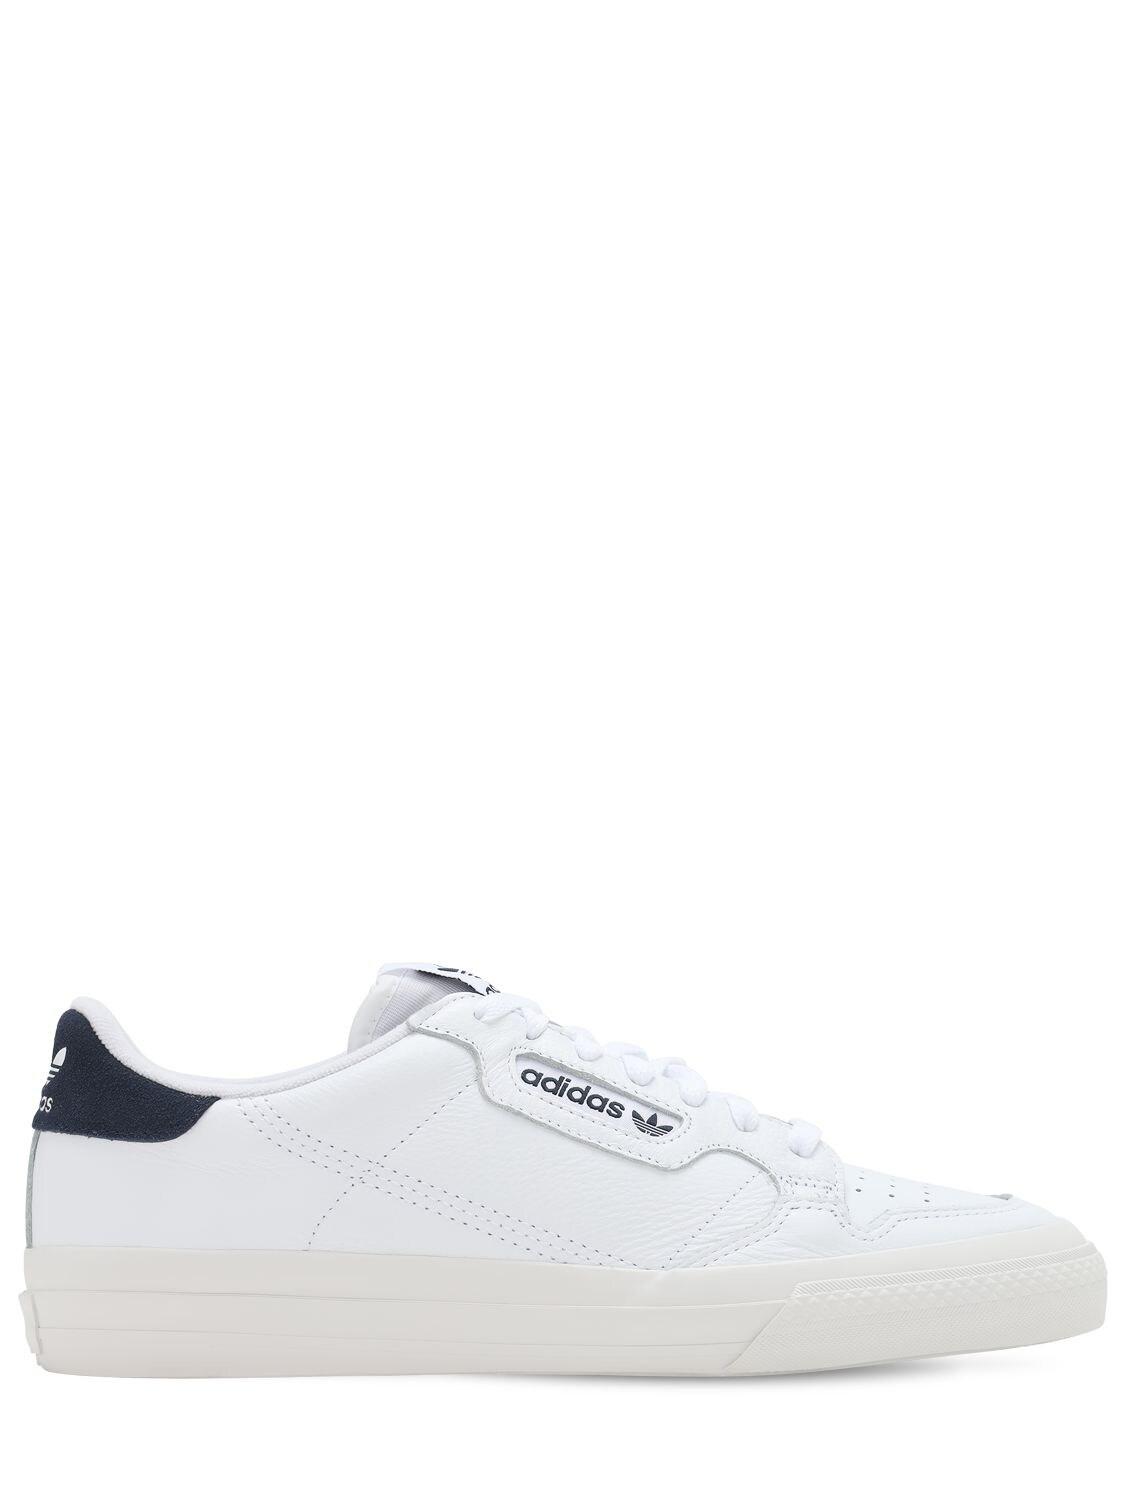 adidas Originals Leather Adidas Continental Vulc Shoes (eg4589) in White  for Men - Save 79% | Lyst